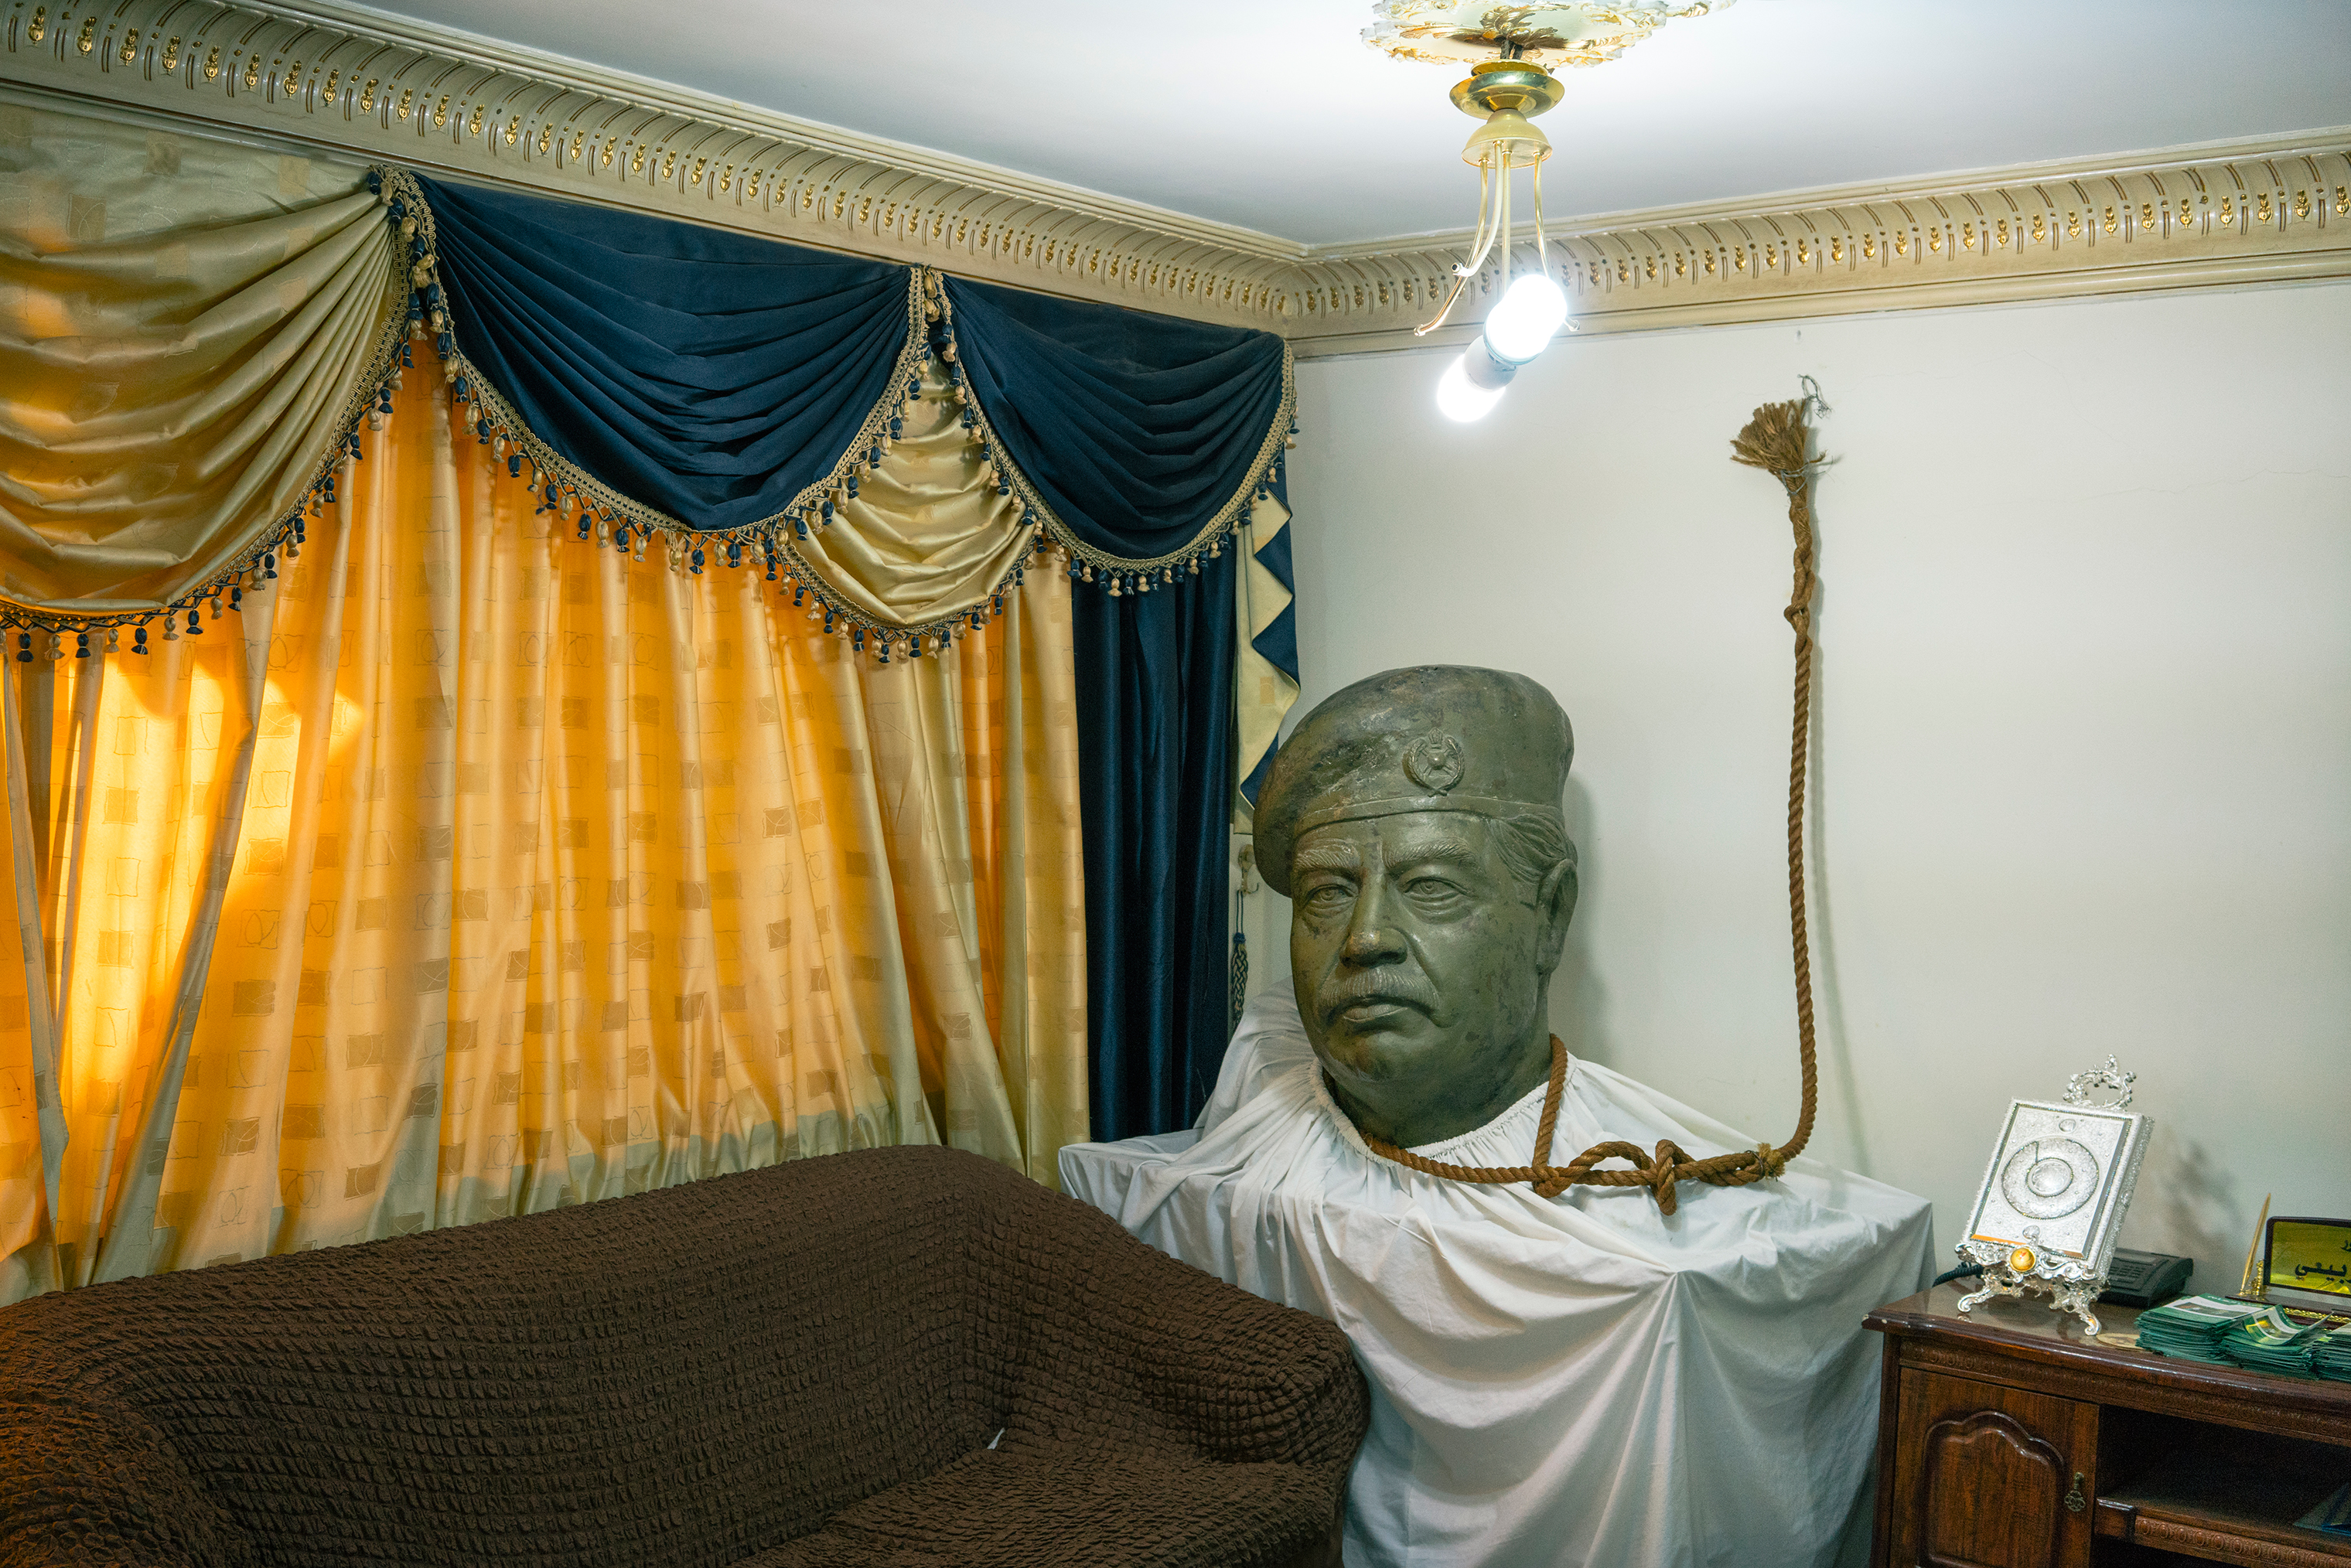 The rope used to execute former Iraqi President Saddam Hussein is in the Baghdad home of Mowaffak al-Rubaie, who witnessed the hanging. (Emanuele Satolli for TIME)